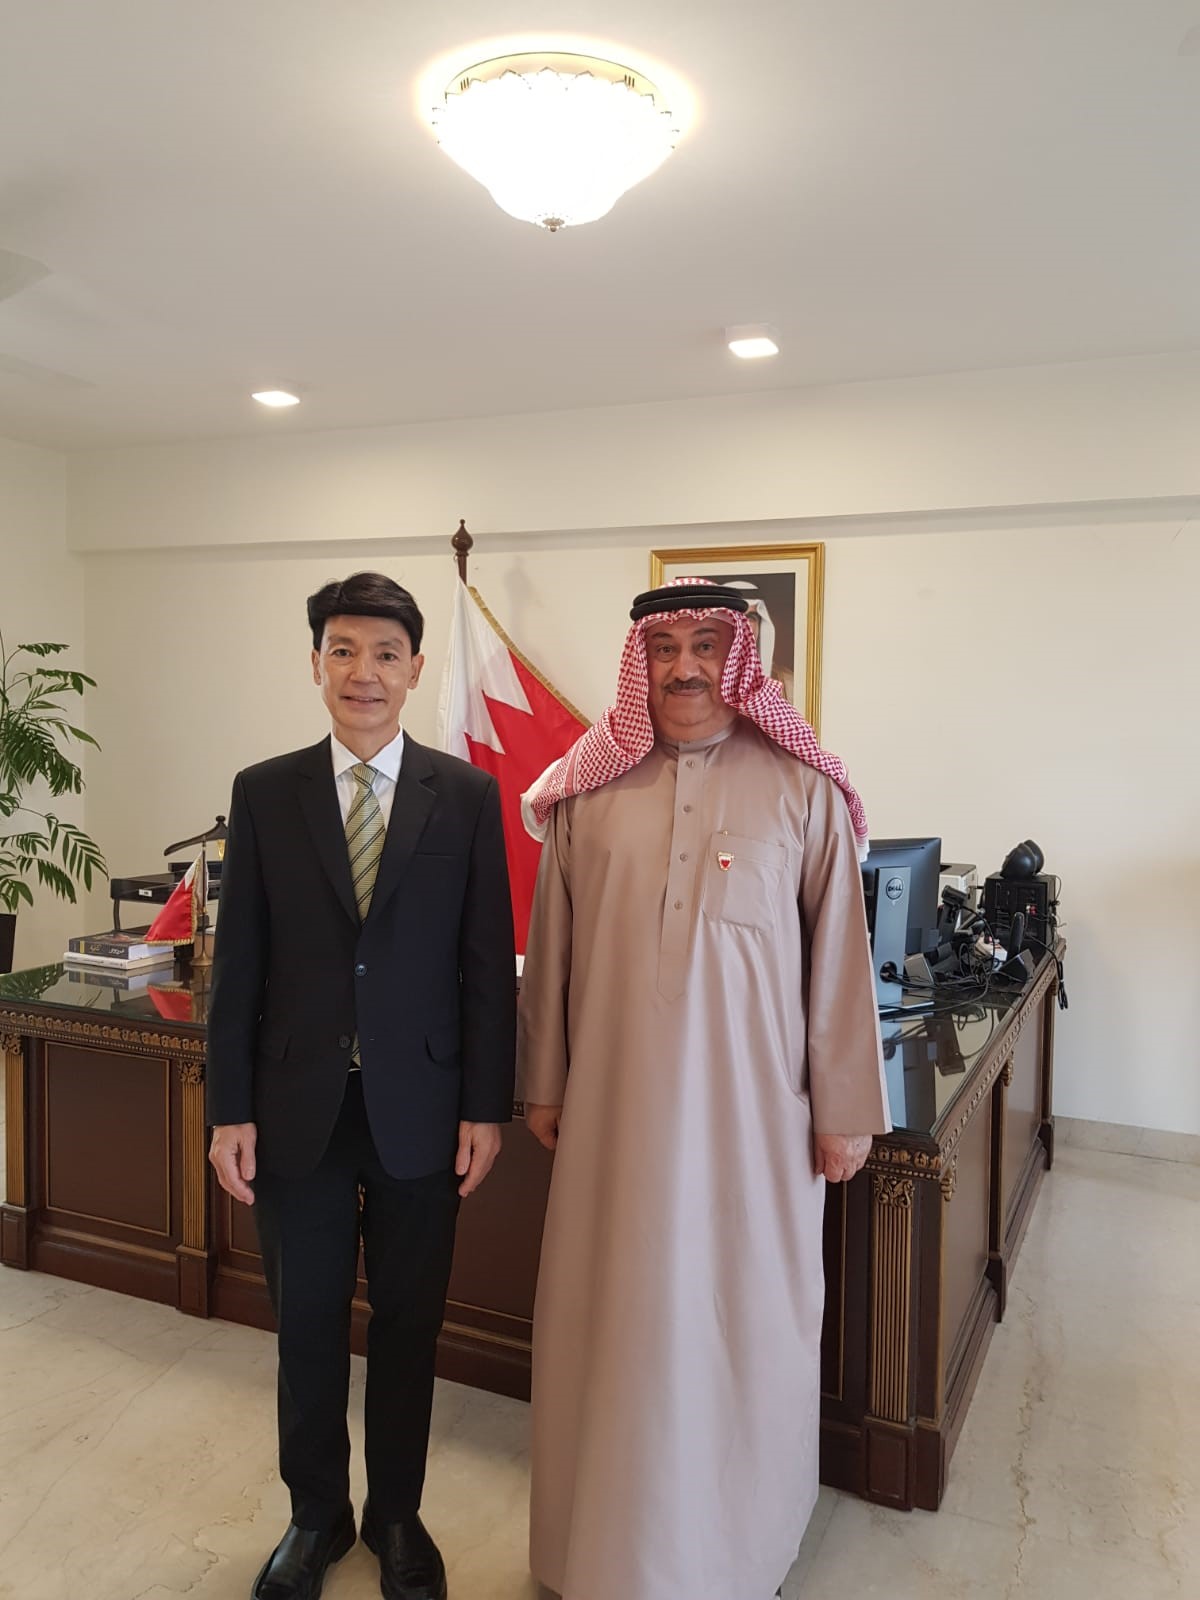 Courtesy Visit of the Secretary General of AALCO to the Embassy of the Kingdom of Bahrain New Delhi